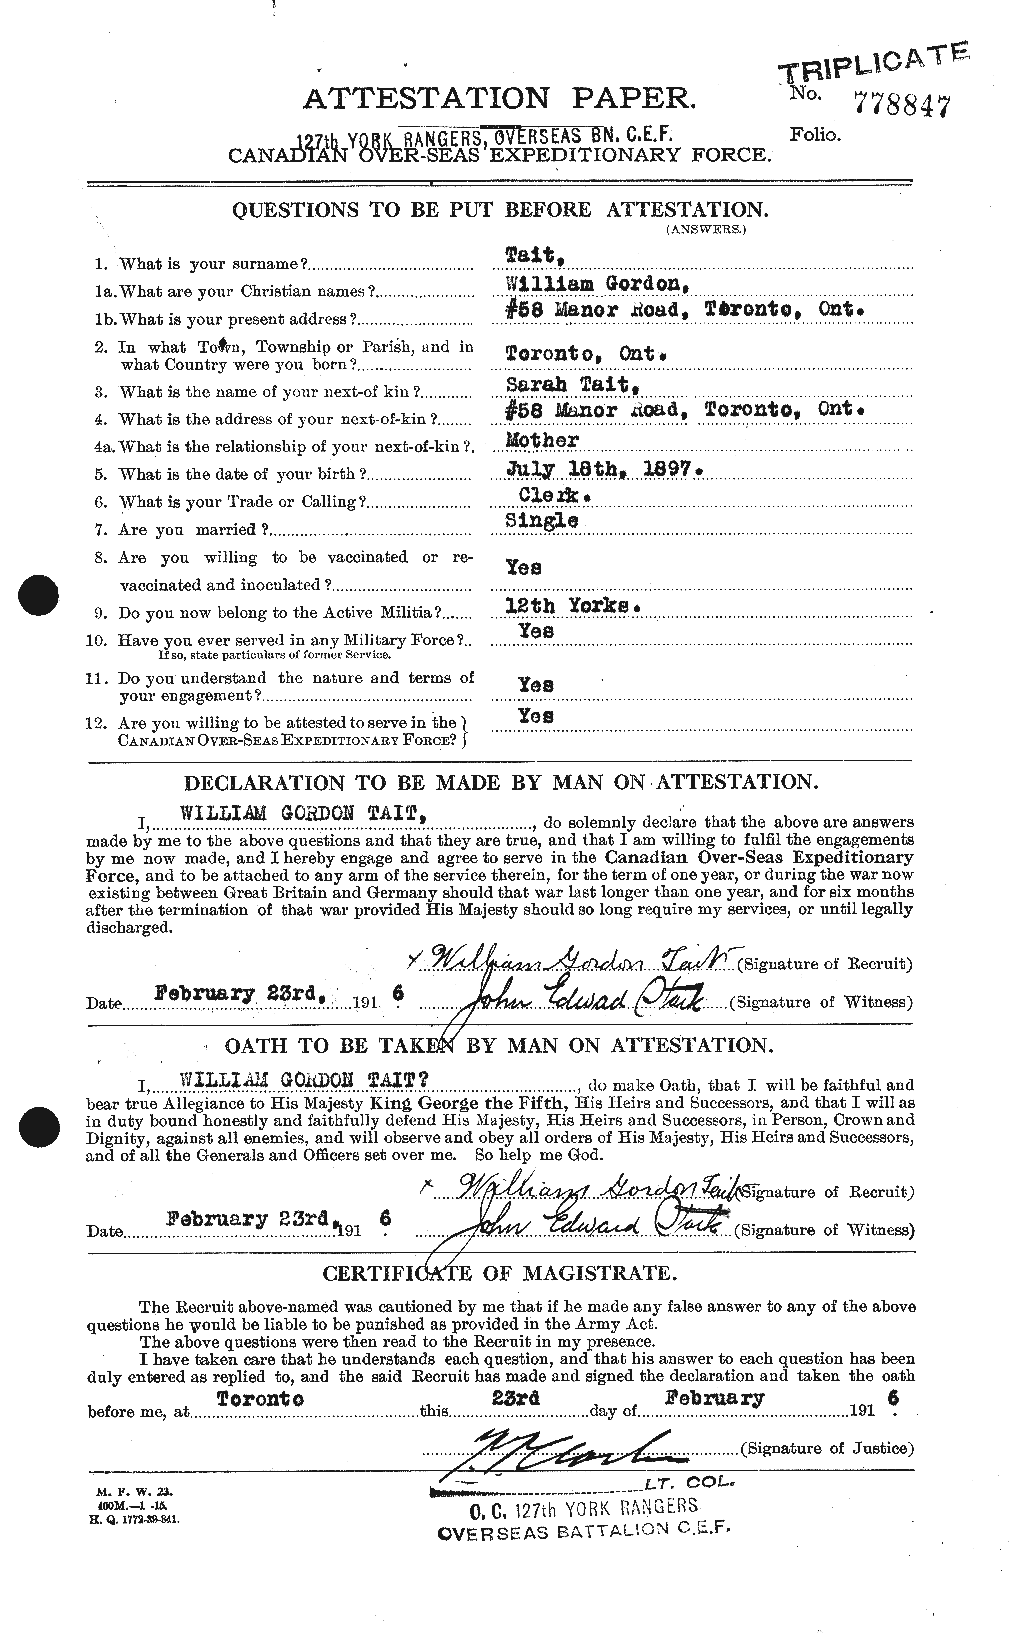 Personnel Records of the First World War - CEF 126976a